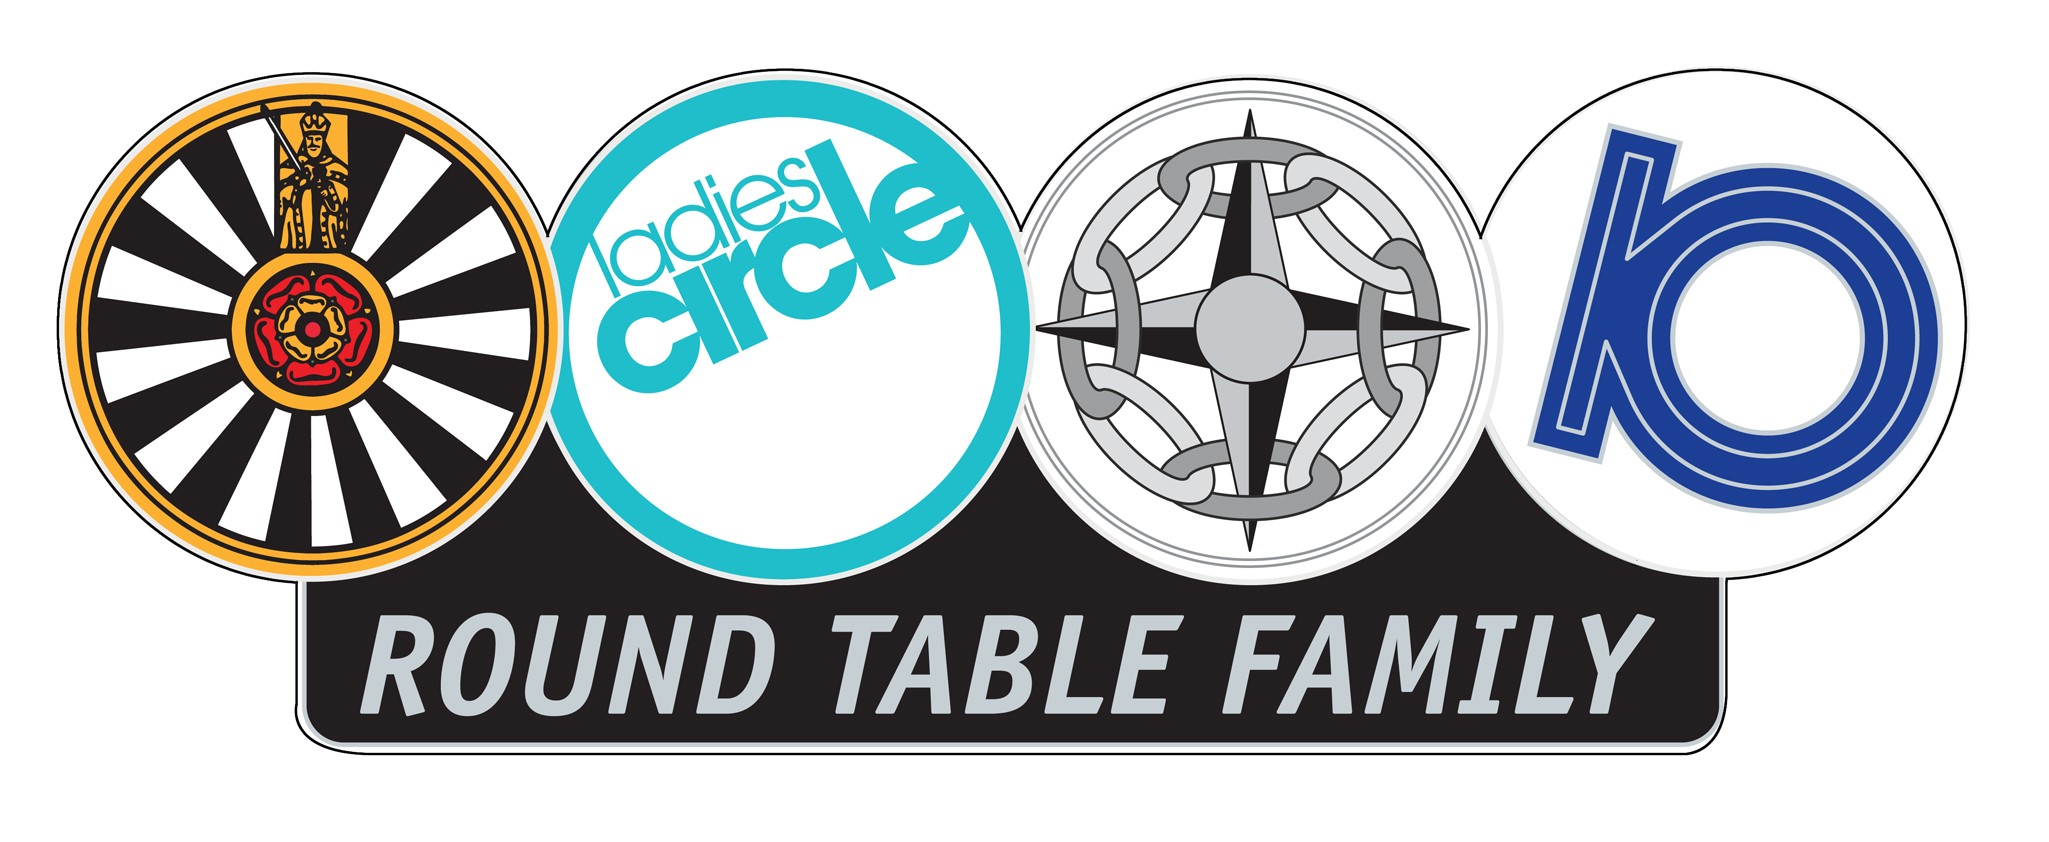 The Round Table Family